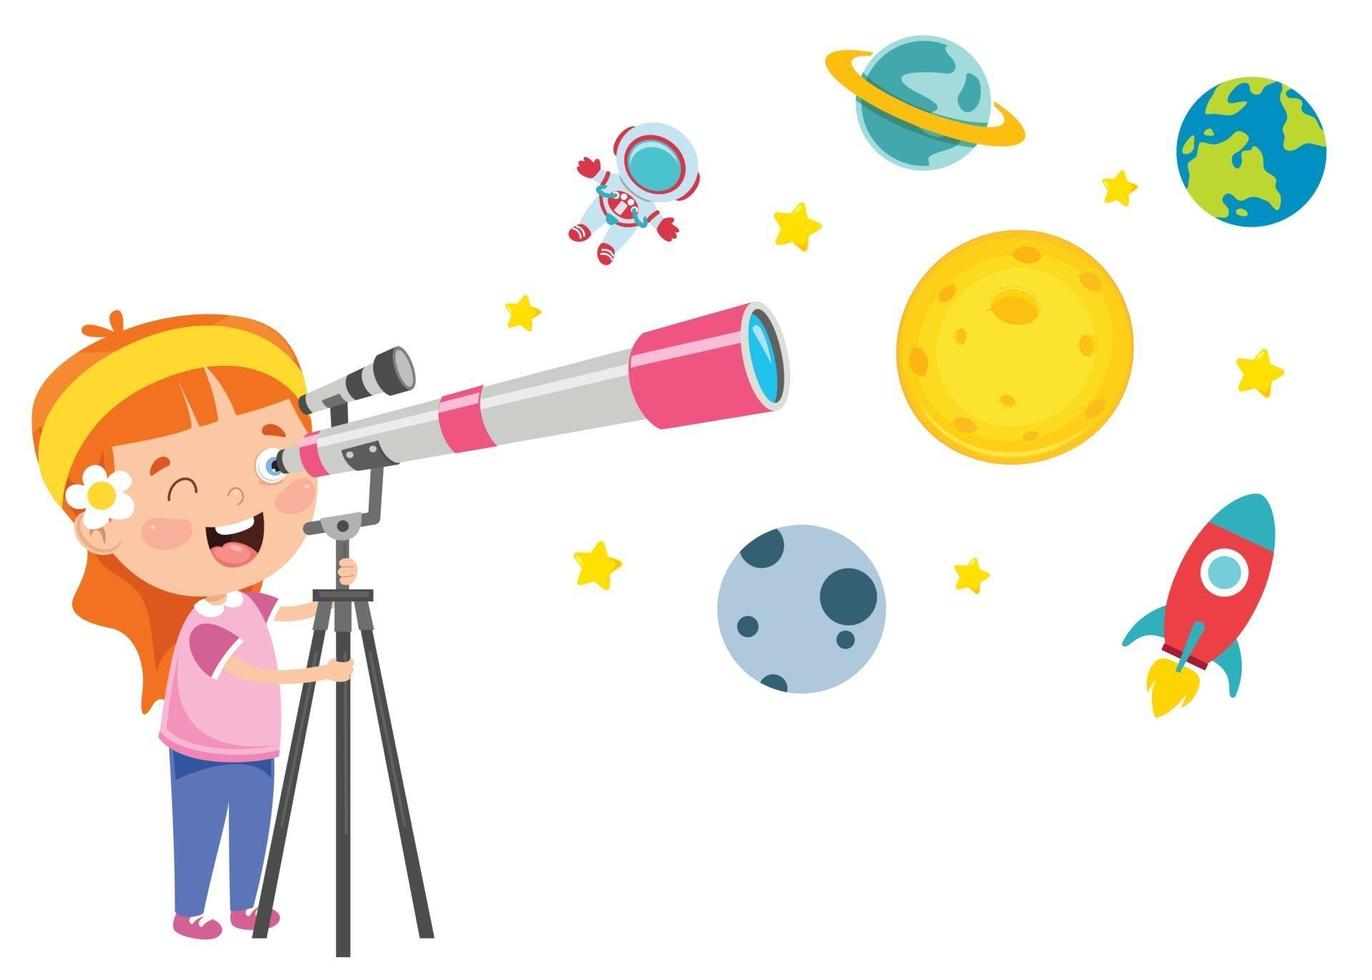 https://static.vecteezy.com/system/resources/previews/002/737/763/non_2x/kid-using-telescope-for-astronomical-research-vector.jpg